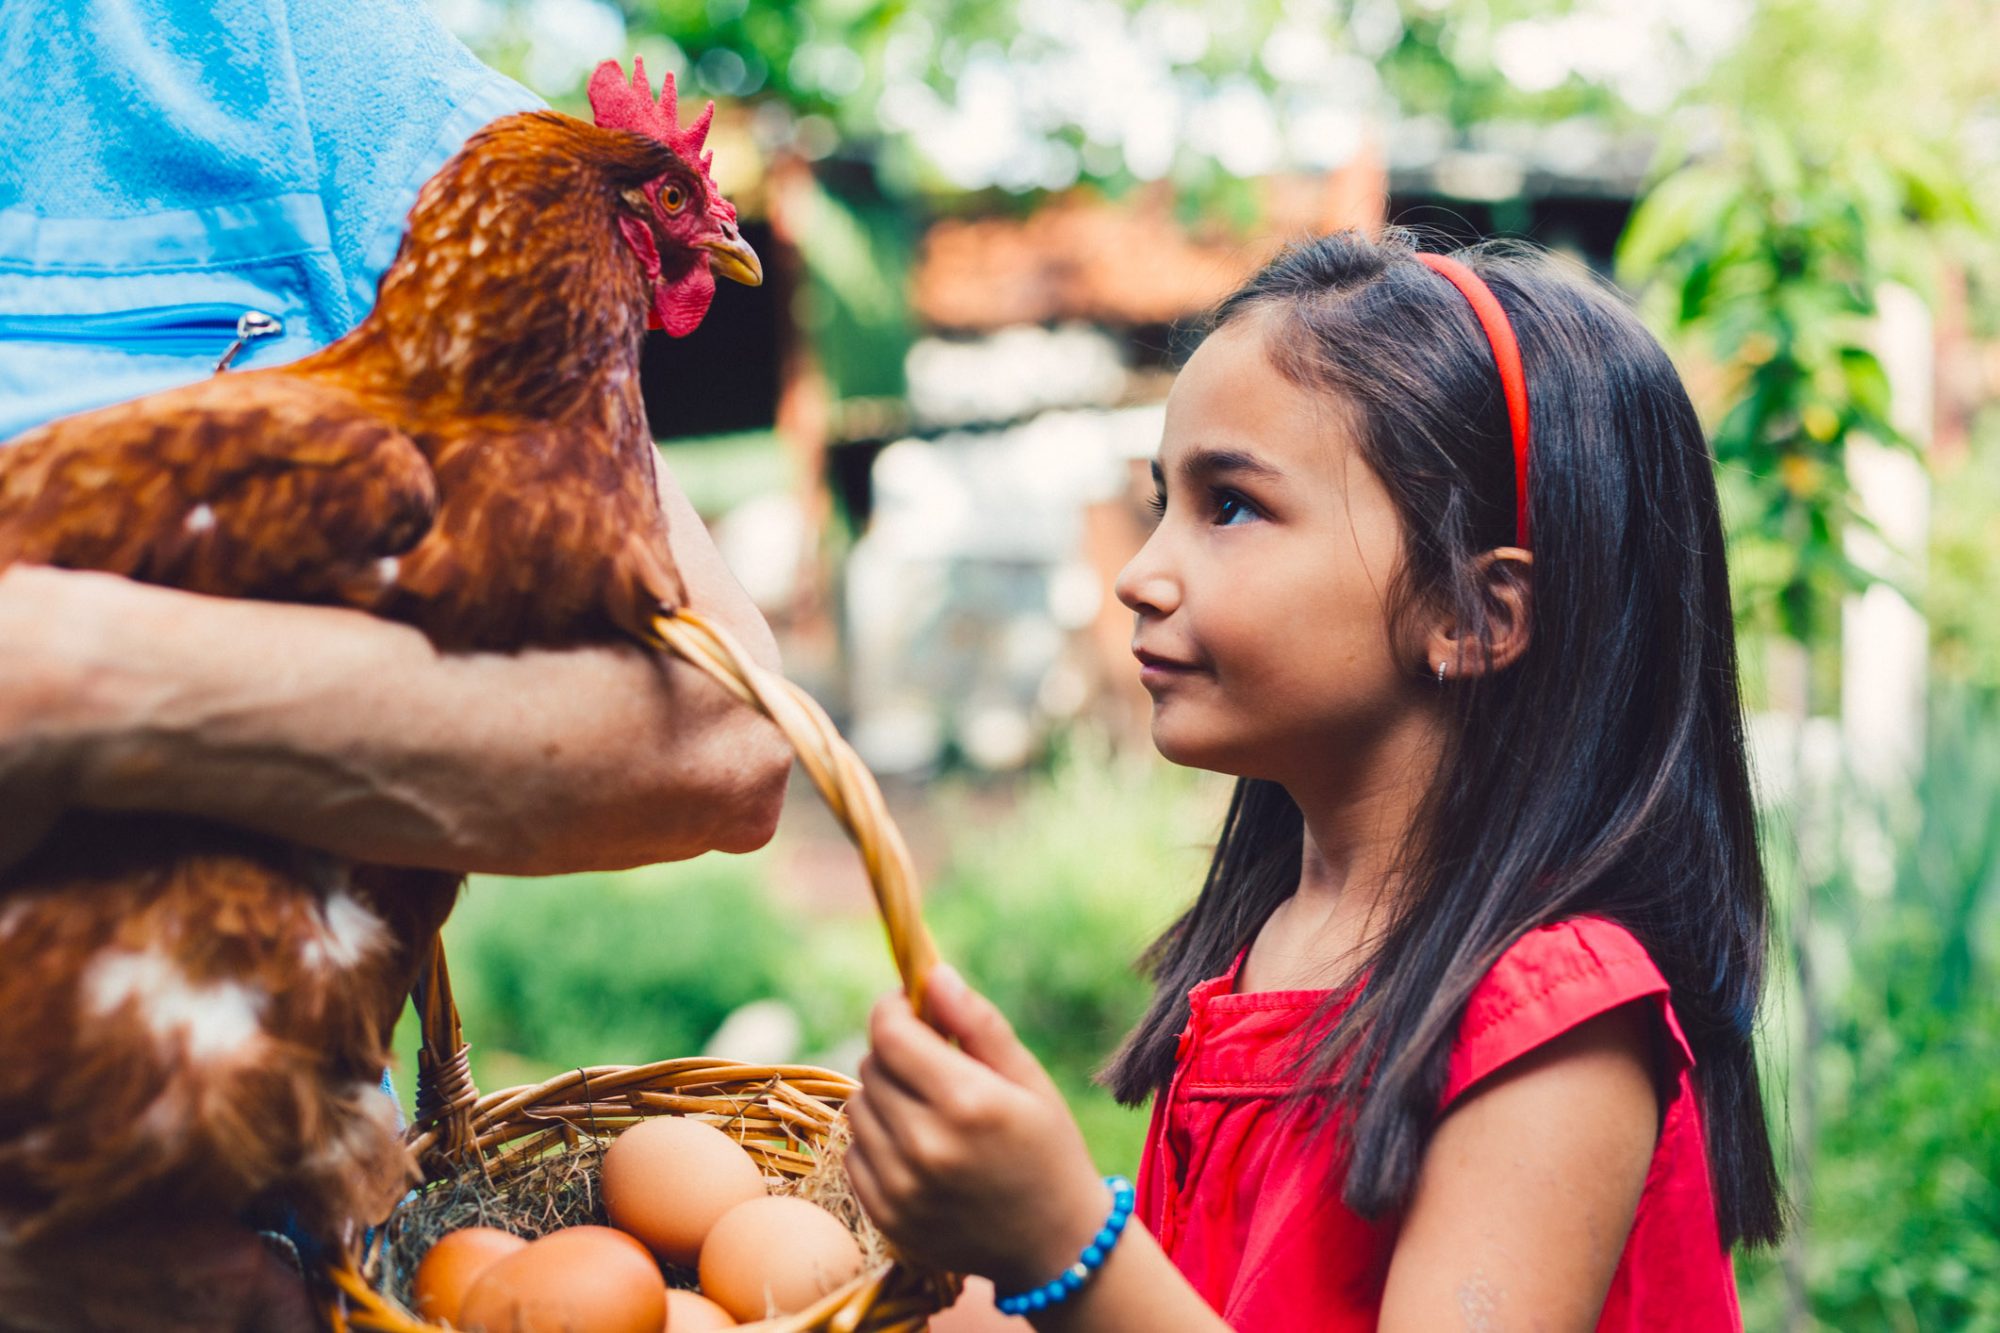 An image of a girl with a chicken.